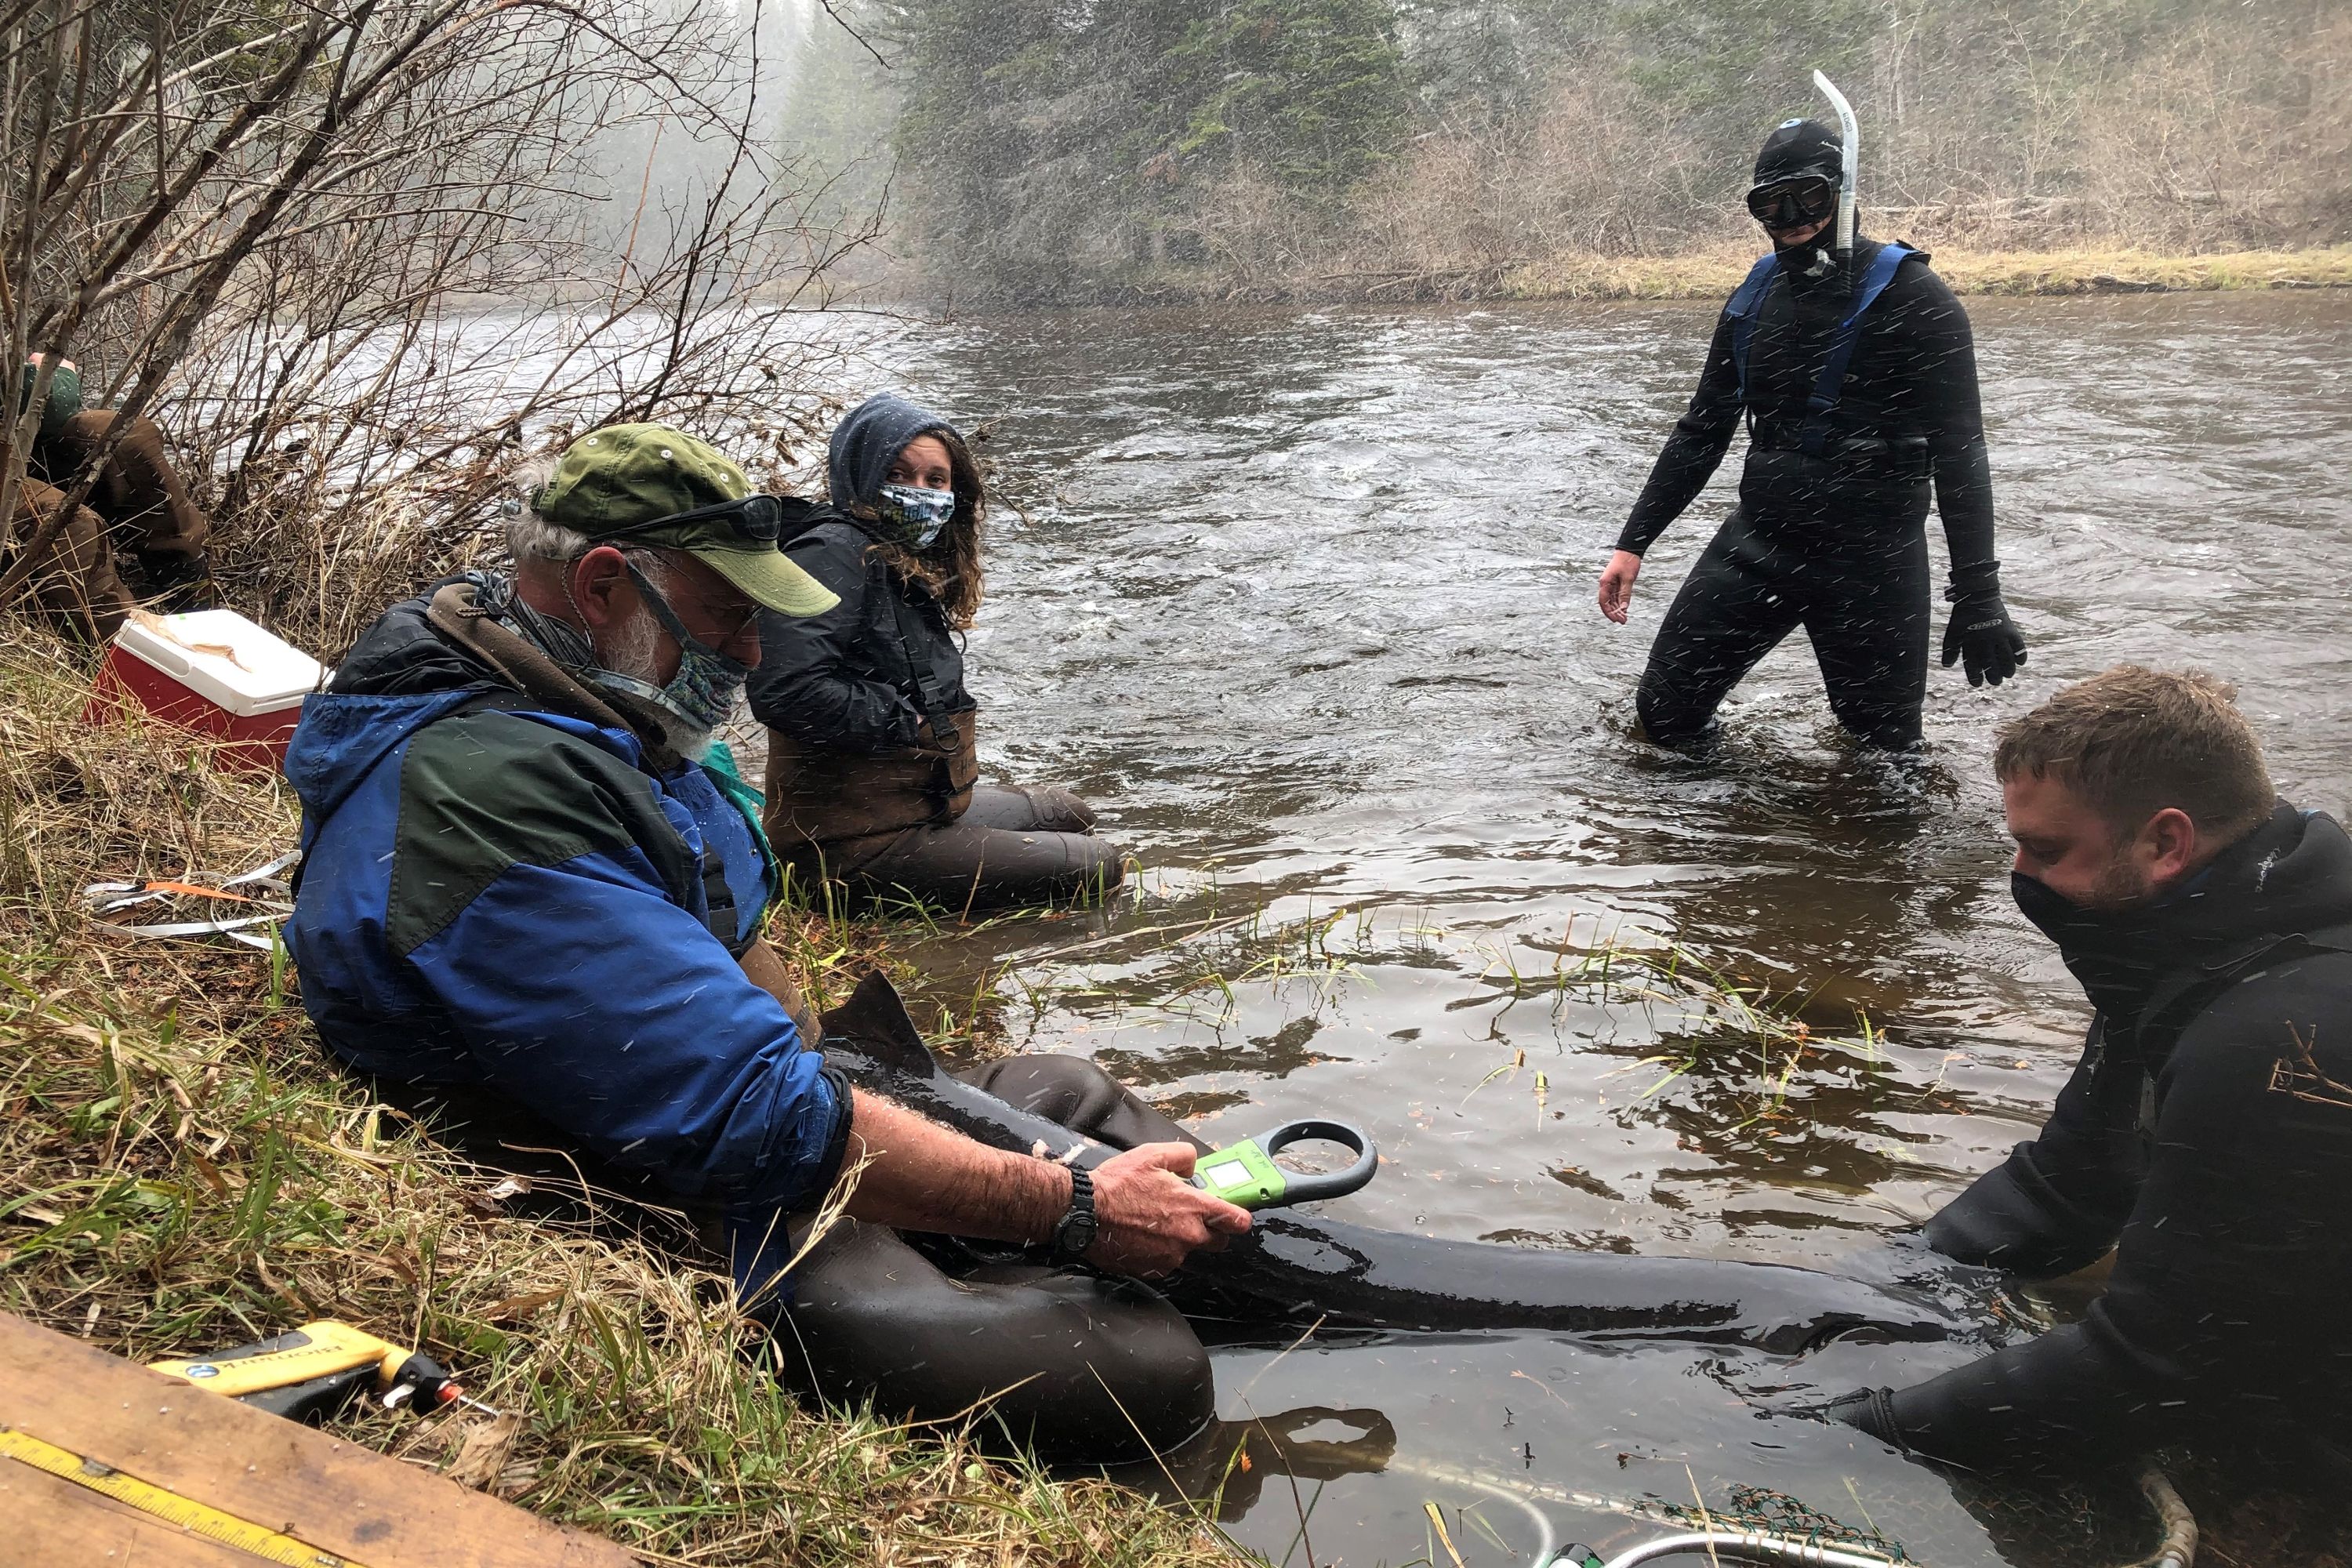 Social distance data collection with masked group and sturgeon in river